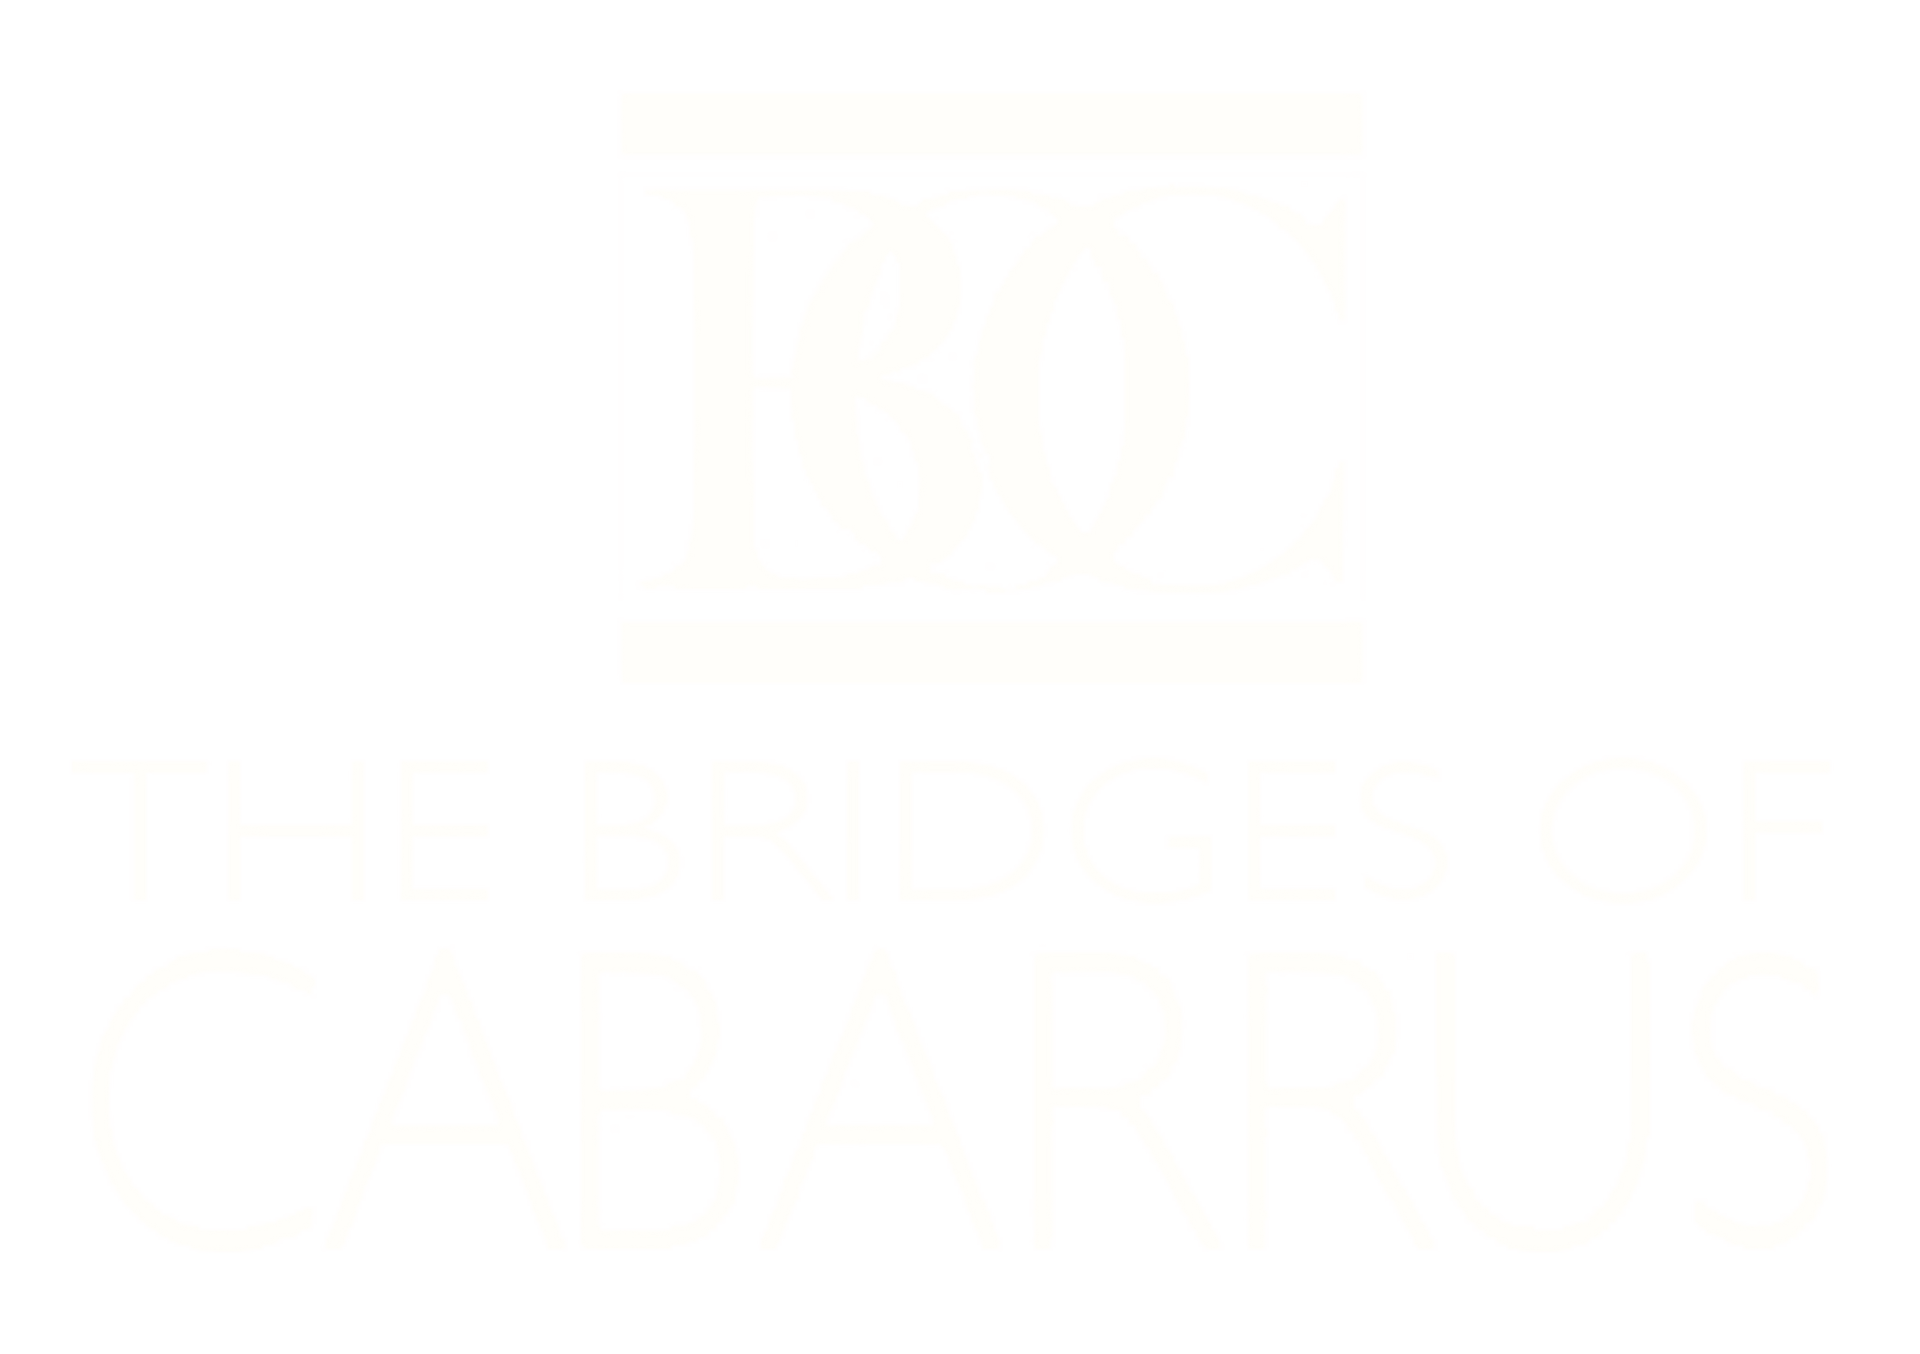 The Bridges of Cabarrus Logo - Footer, go to home